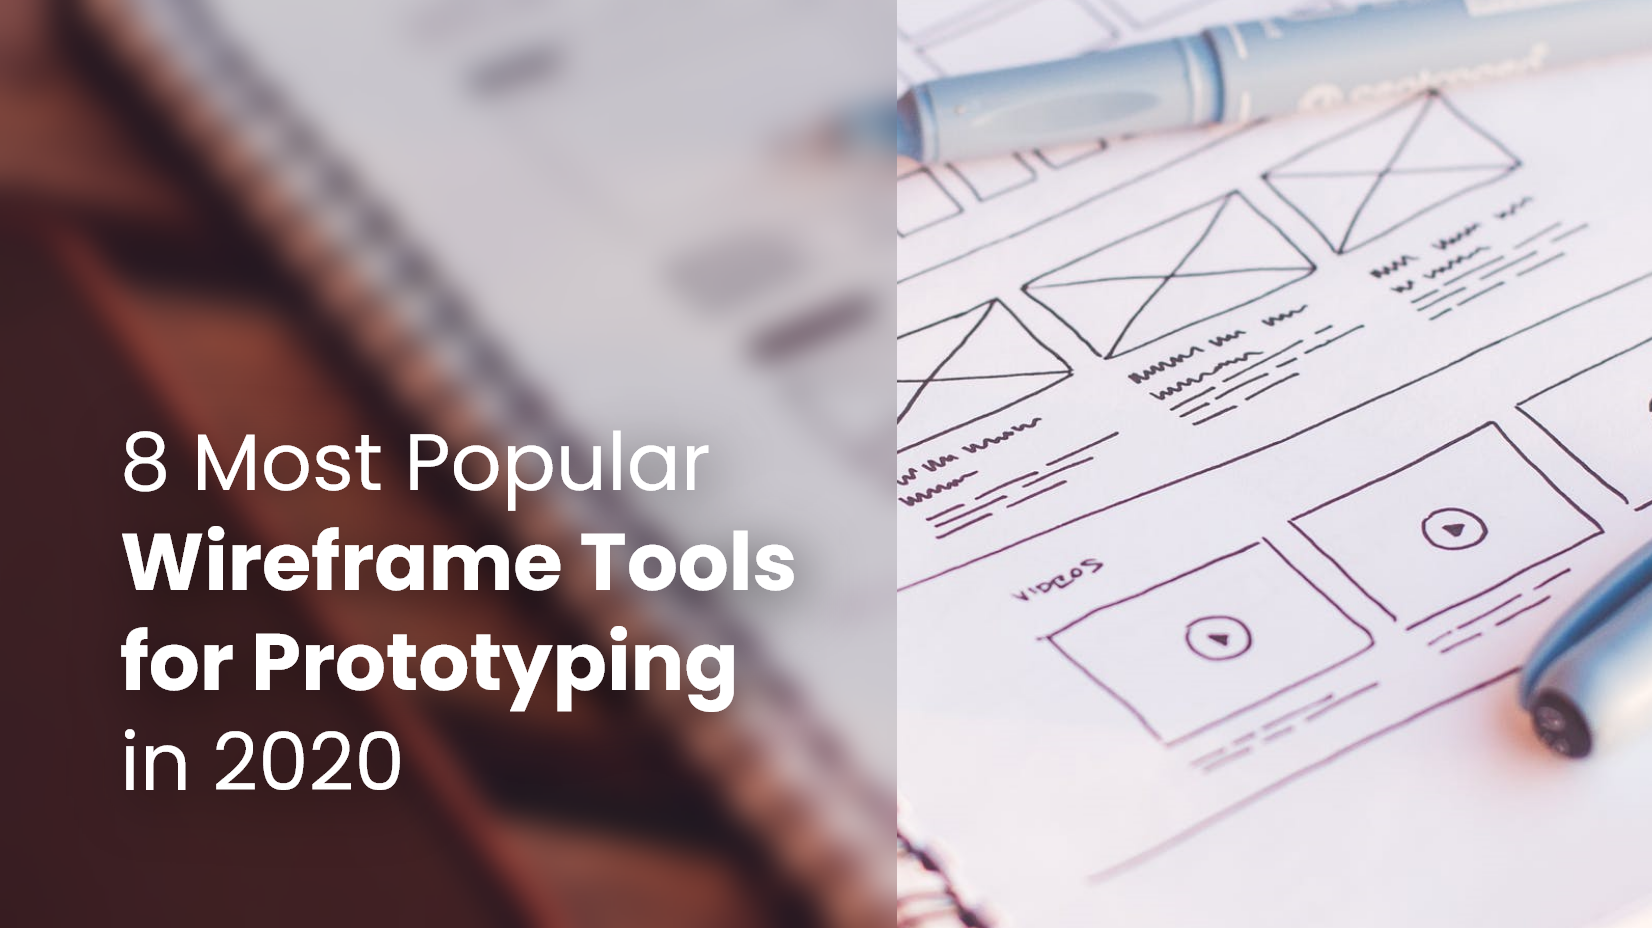 wireframe tools most popular